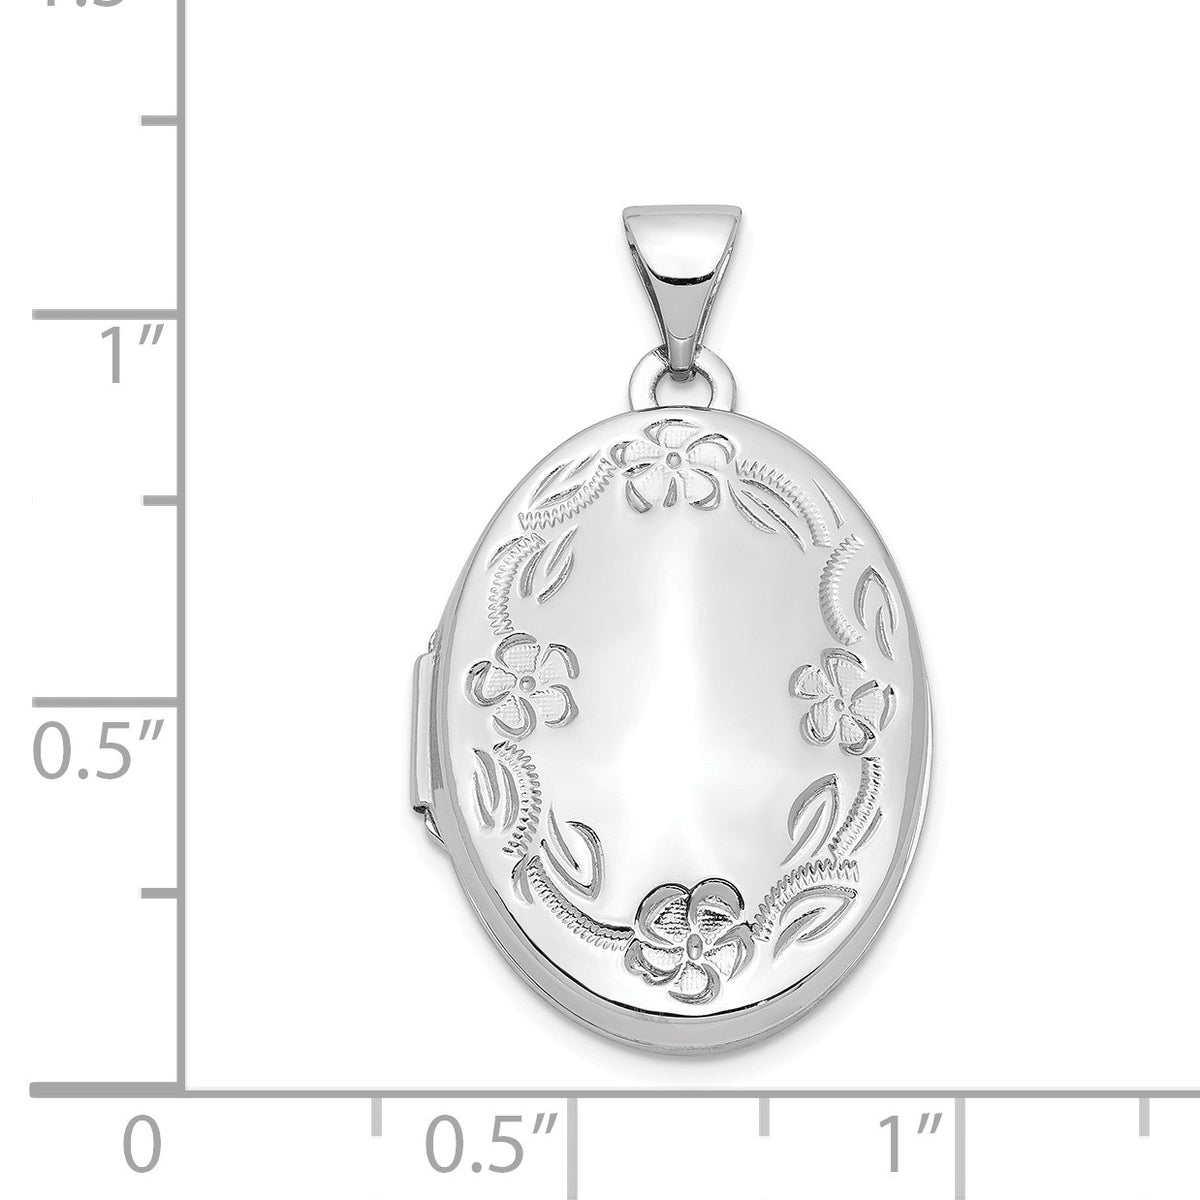 Alternate view of the 14k White Gold 21mm Hand Engraved Floral Oval Locket by The Black Bow Jewelry Co.